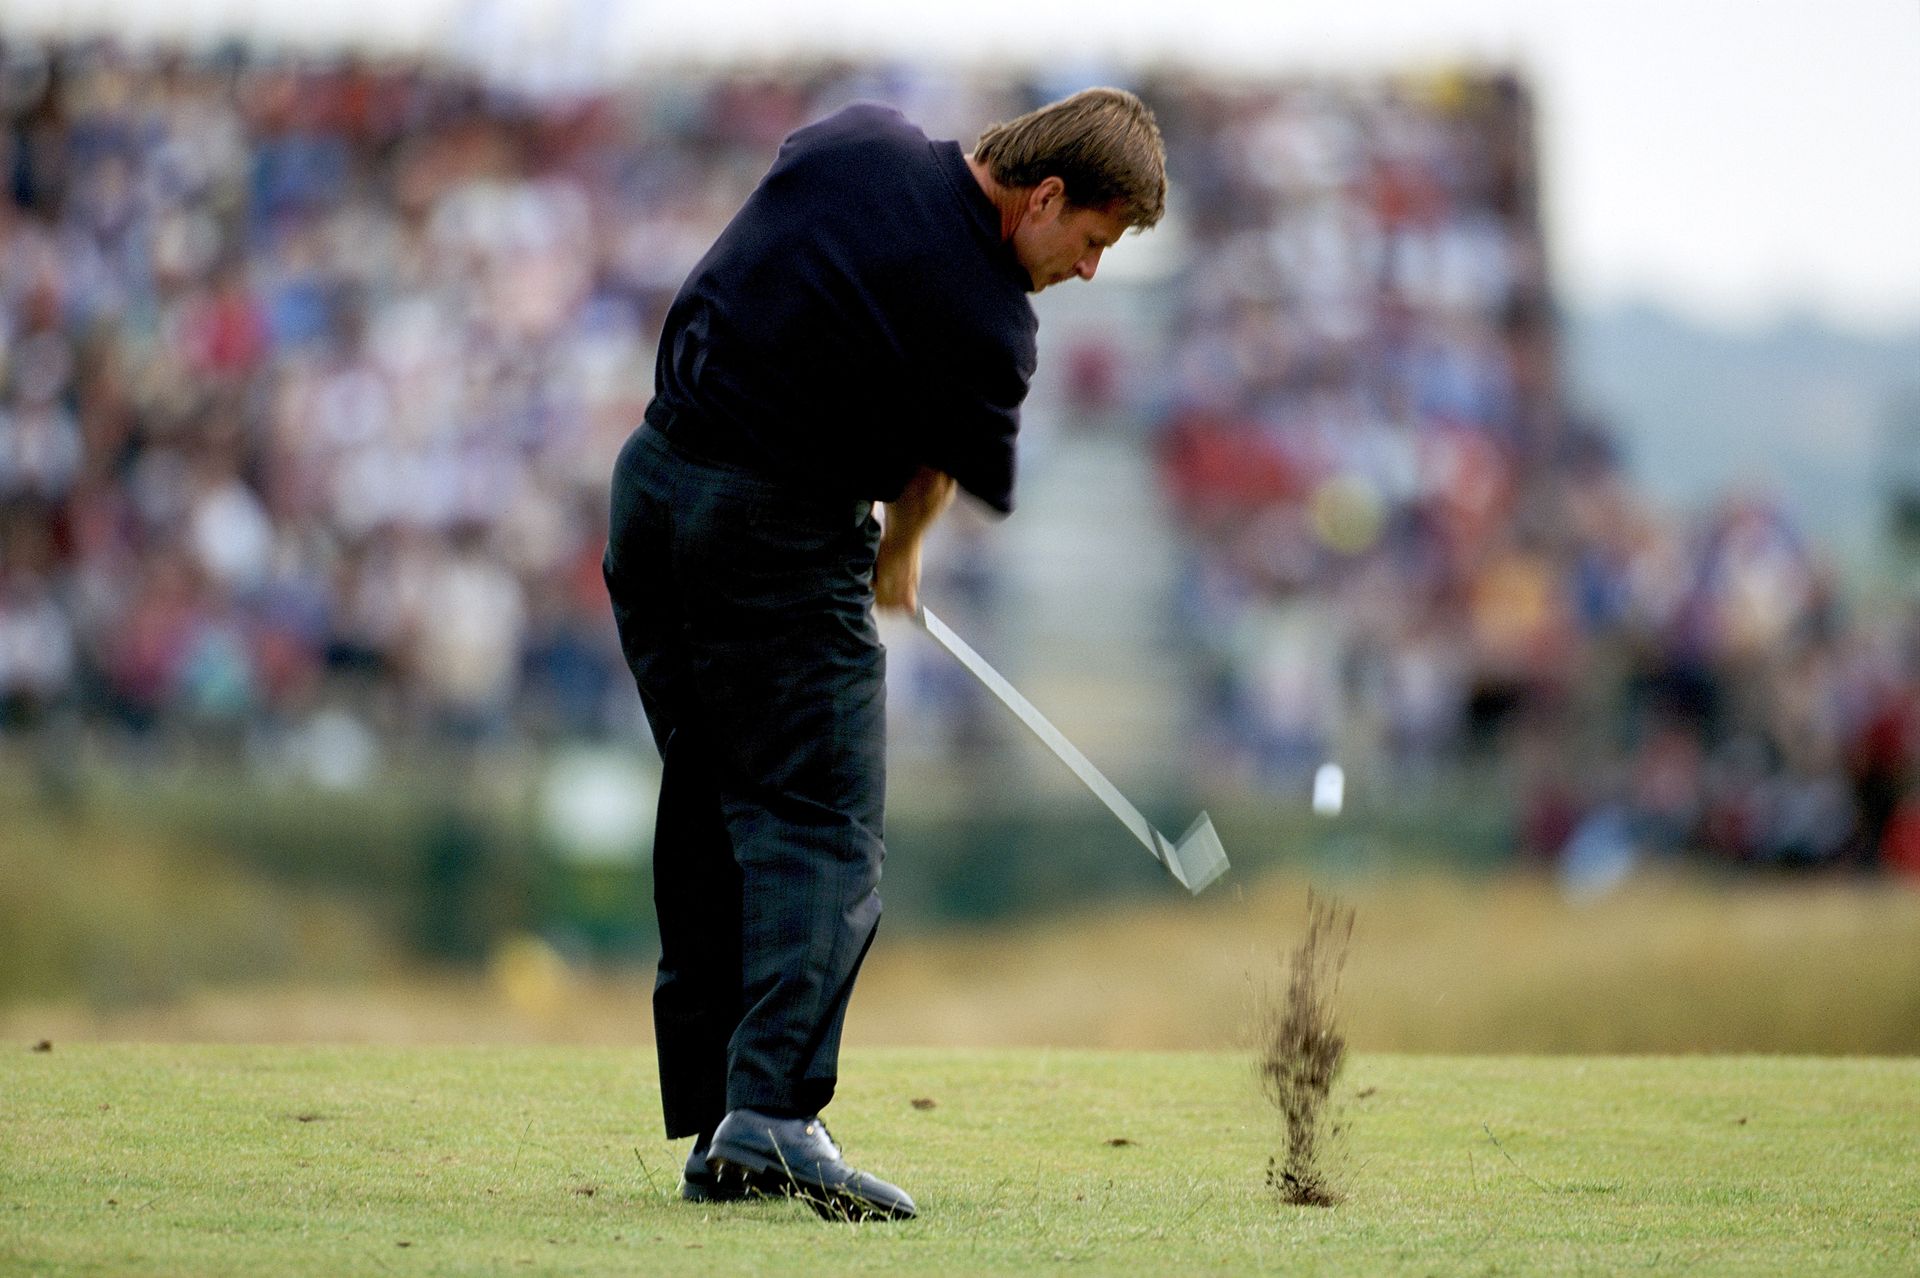 <p>                     One of Nick Faldo’s greatest ever achievements was surely the 18 straight pars he put together at Muirfield in 1987 to win the first of his six Major Championship titles. Flashy? No. However, it says everything about Faldo and his swing that he could control his ball so perfectly around the links on the final day of a Major. The Englishman had a wonderful temperament, too, but his ball-striking qualities were also right up there with the best.                   </p>